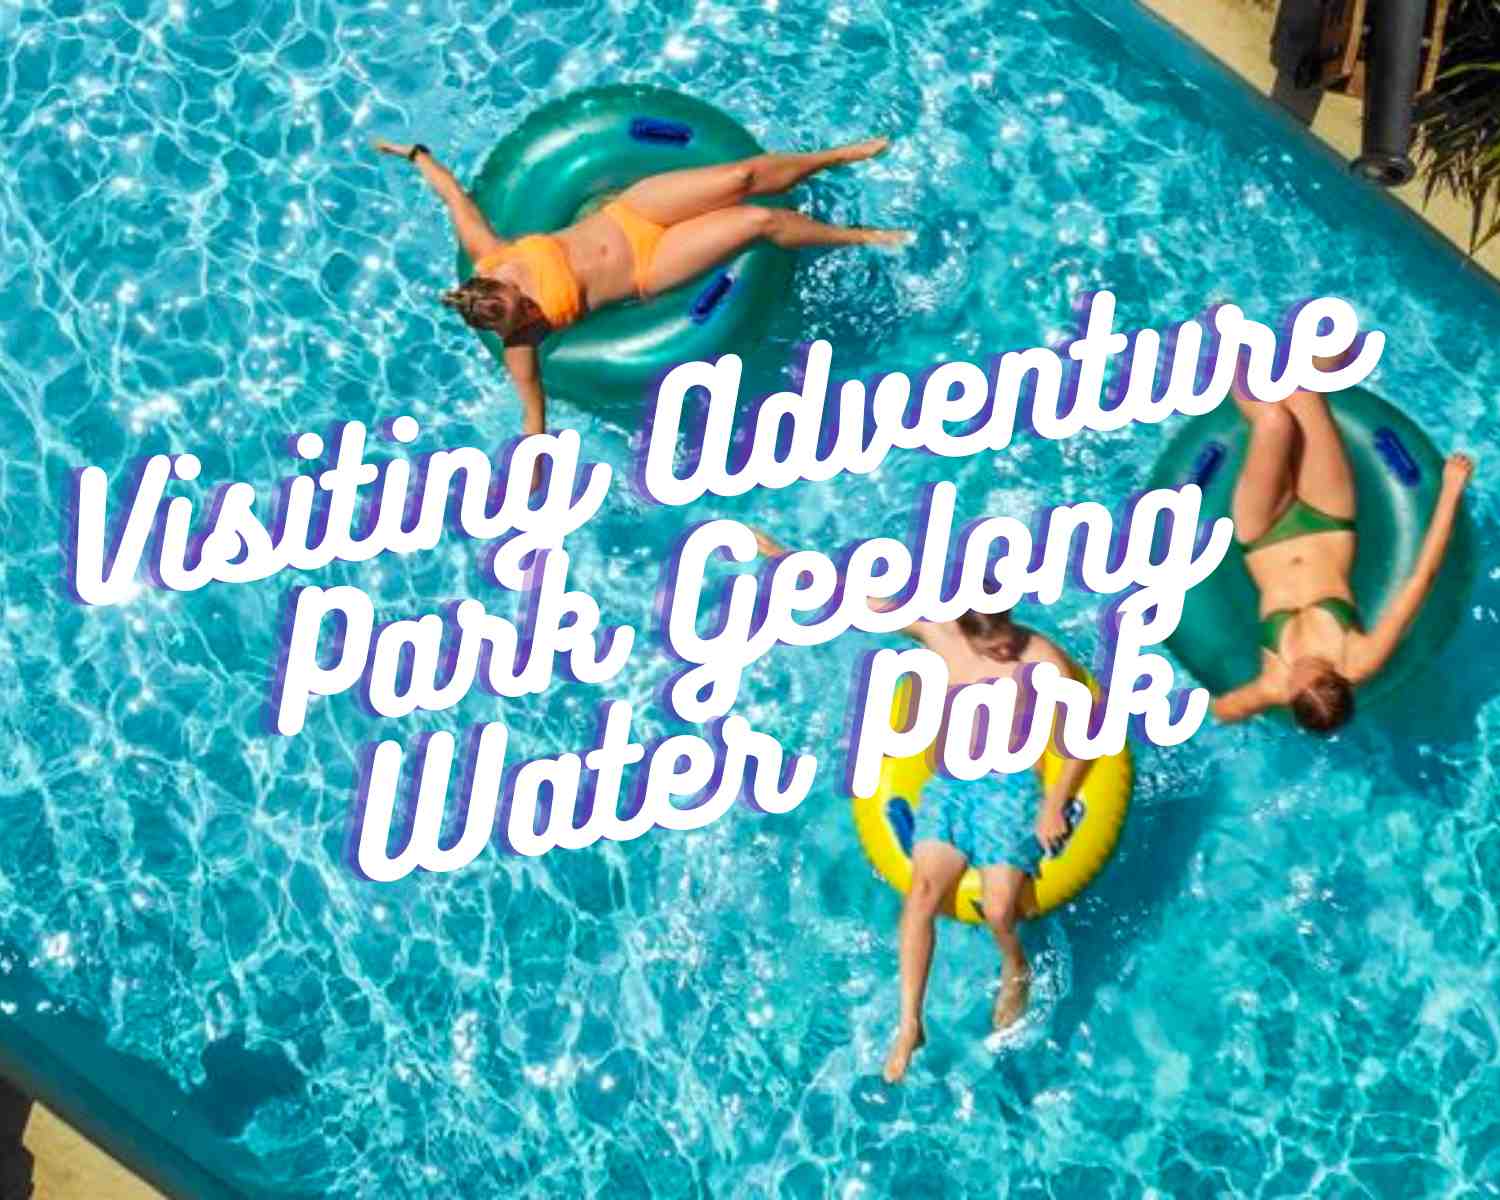 Adventure Park Geelong Water Park with kids is the biggest theme park in the state